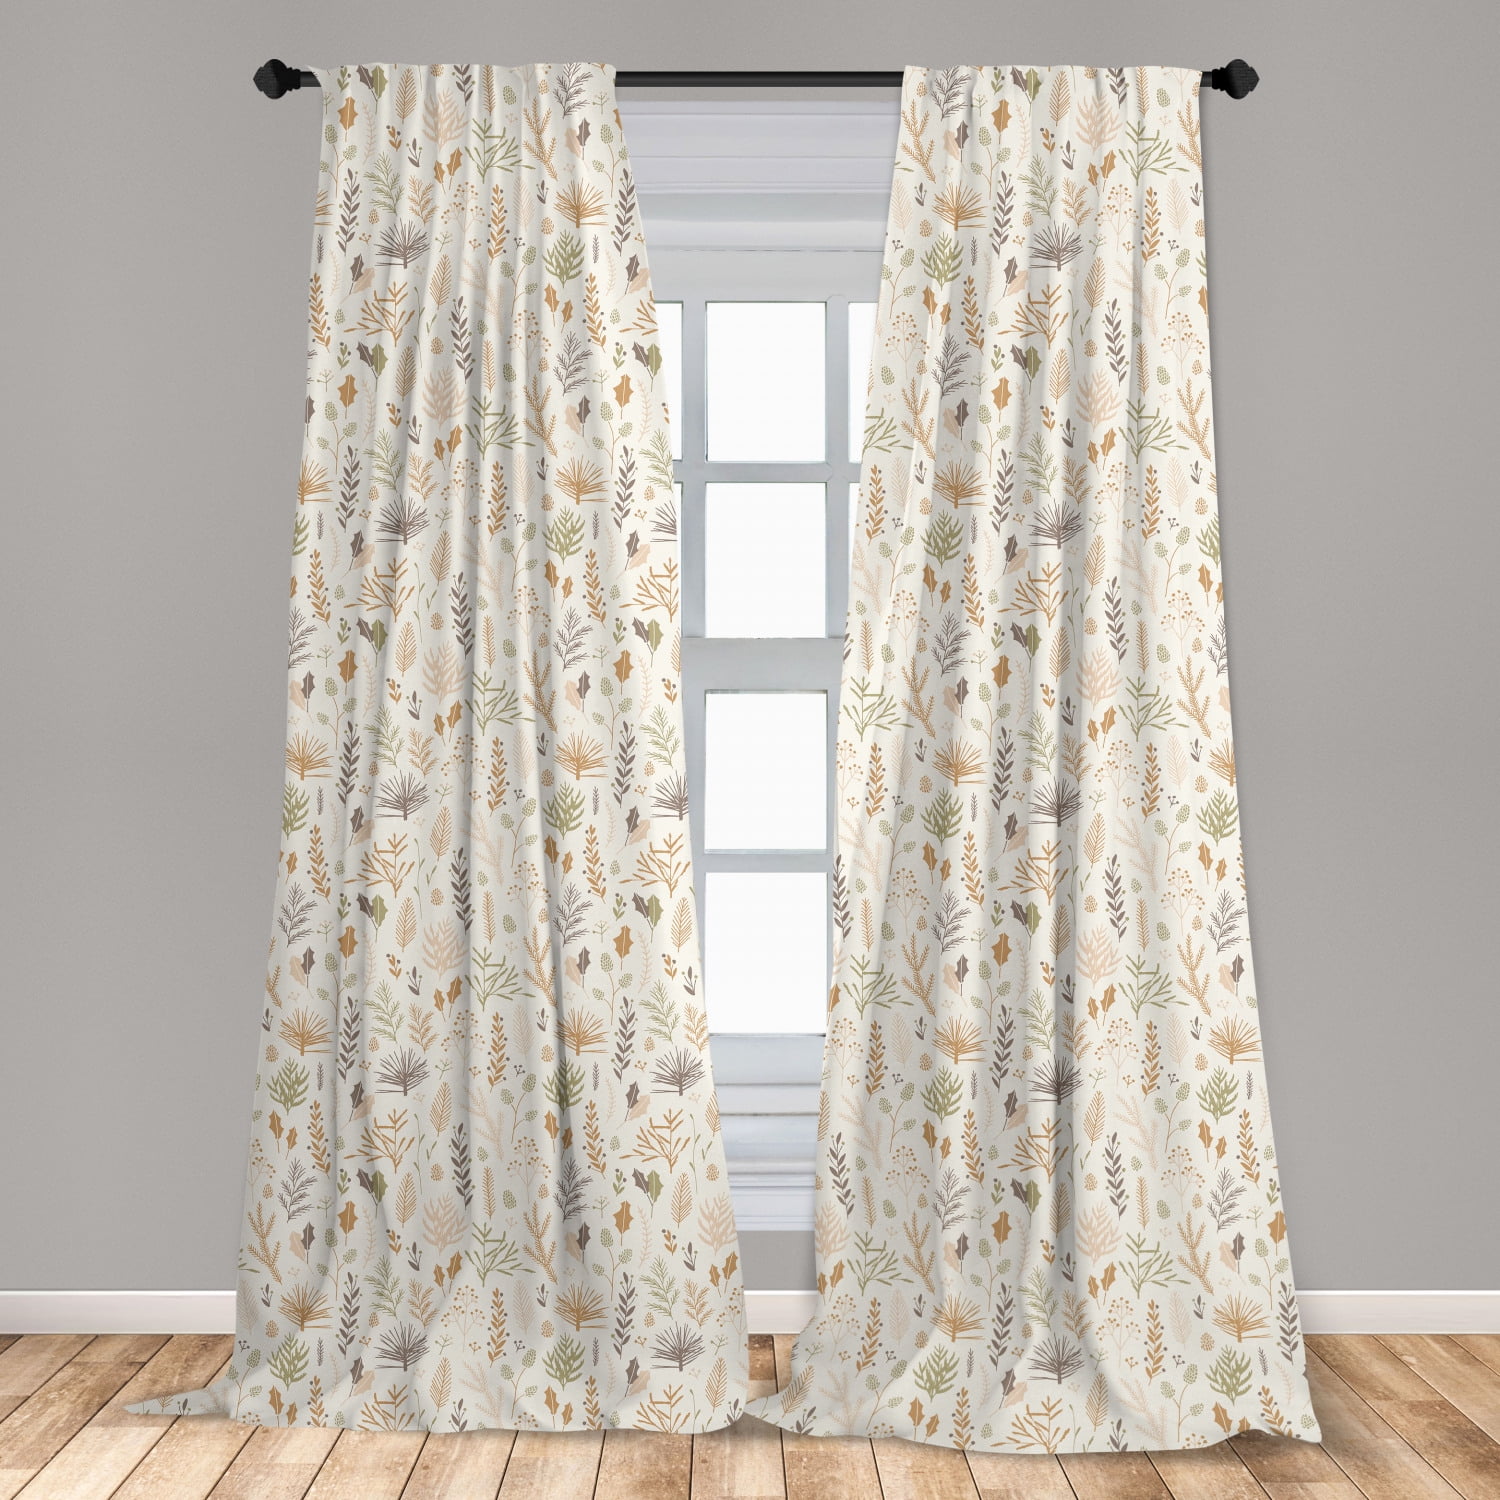 Set of 2 Waverly Curtain Panels Window Drapes Floral  Size 28"W x 34"L 